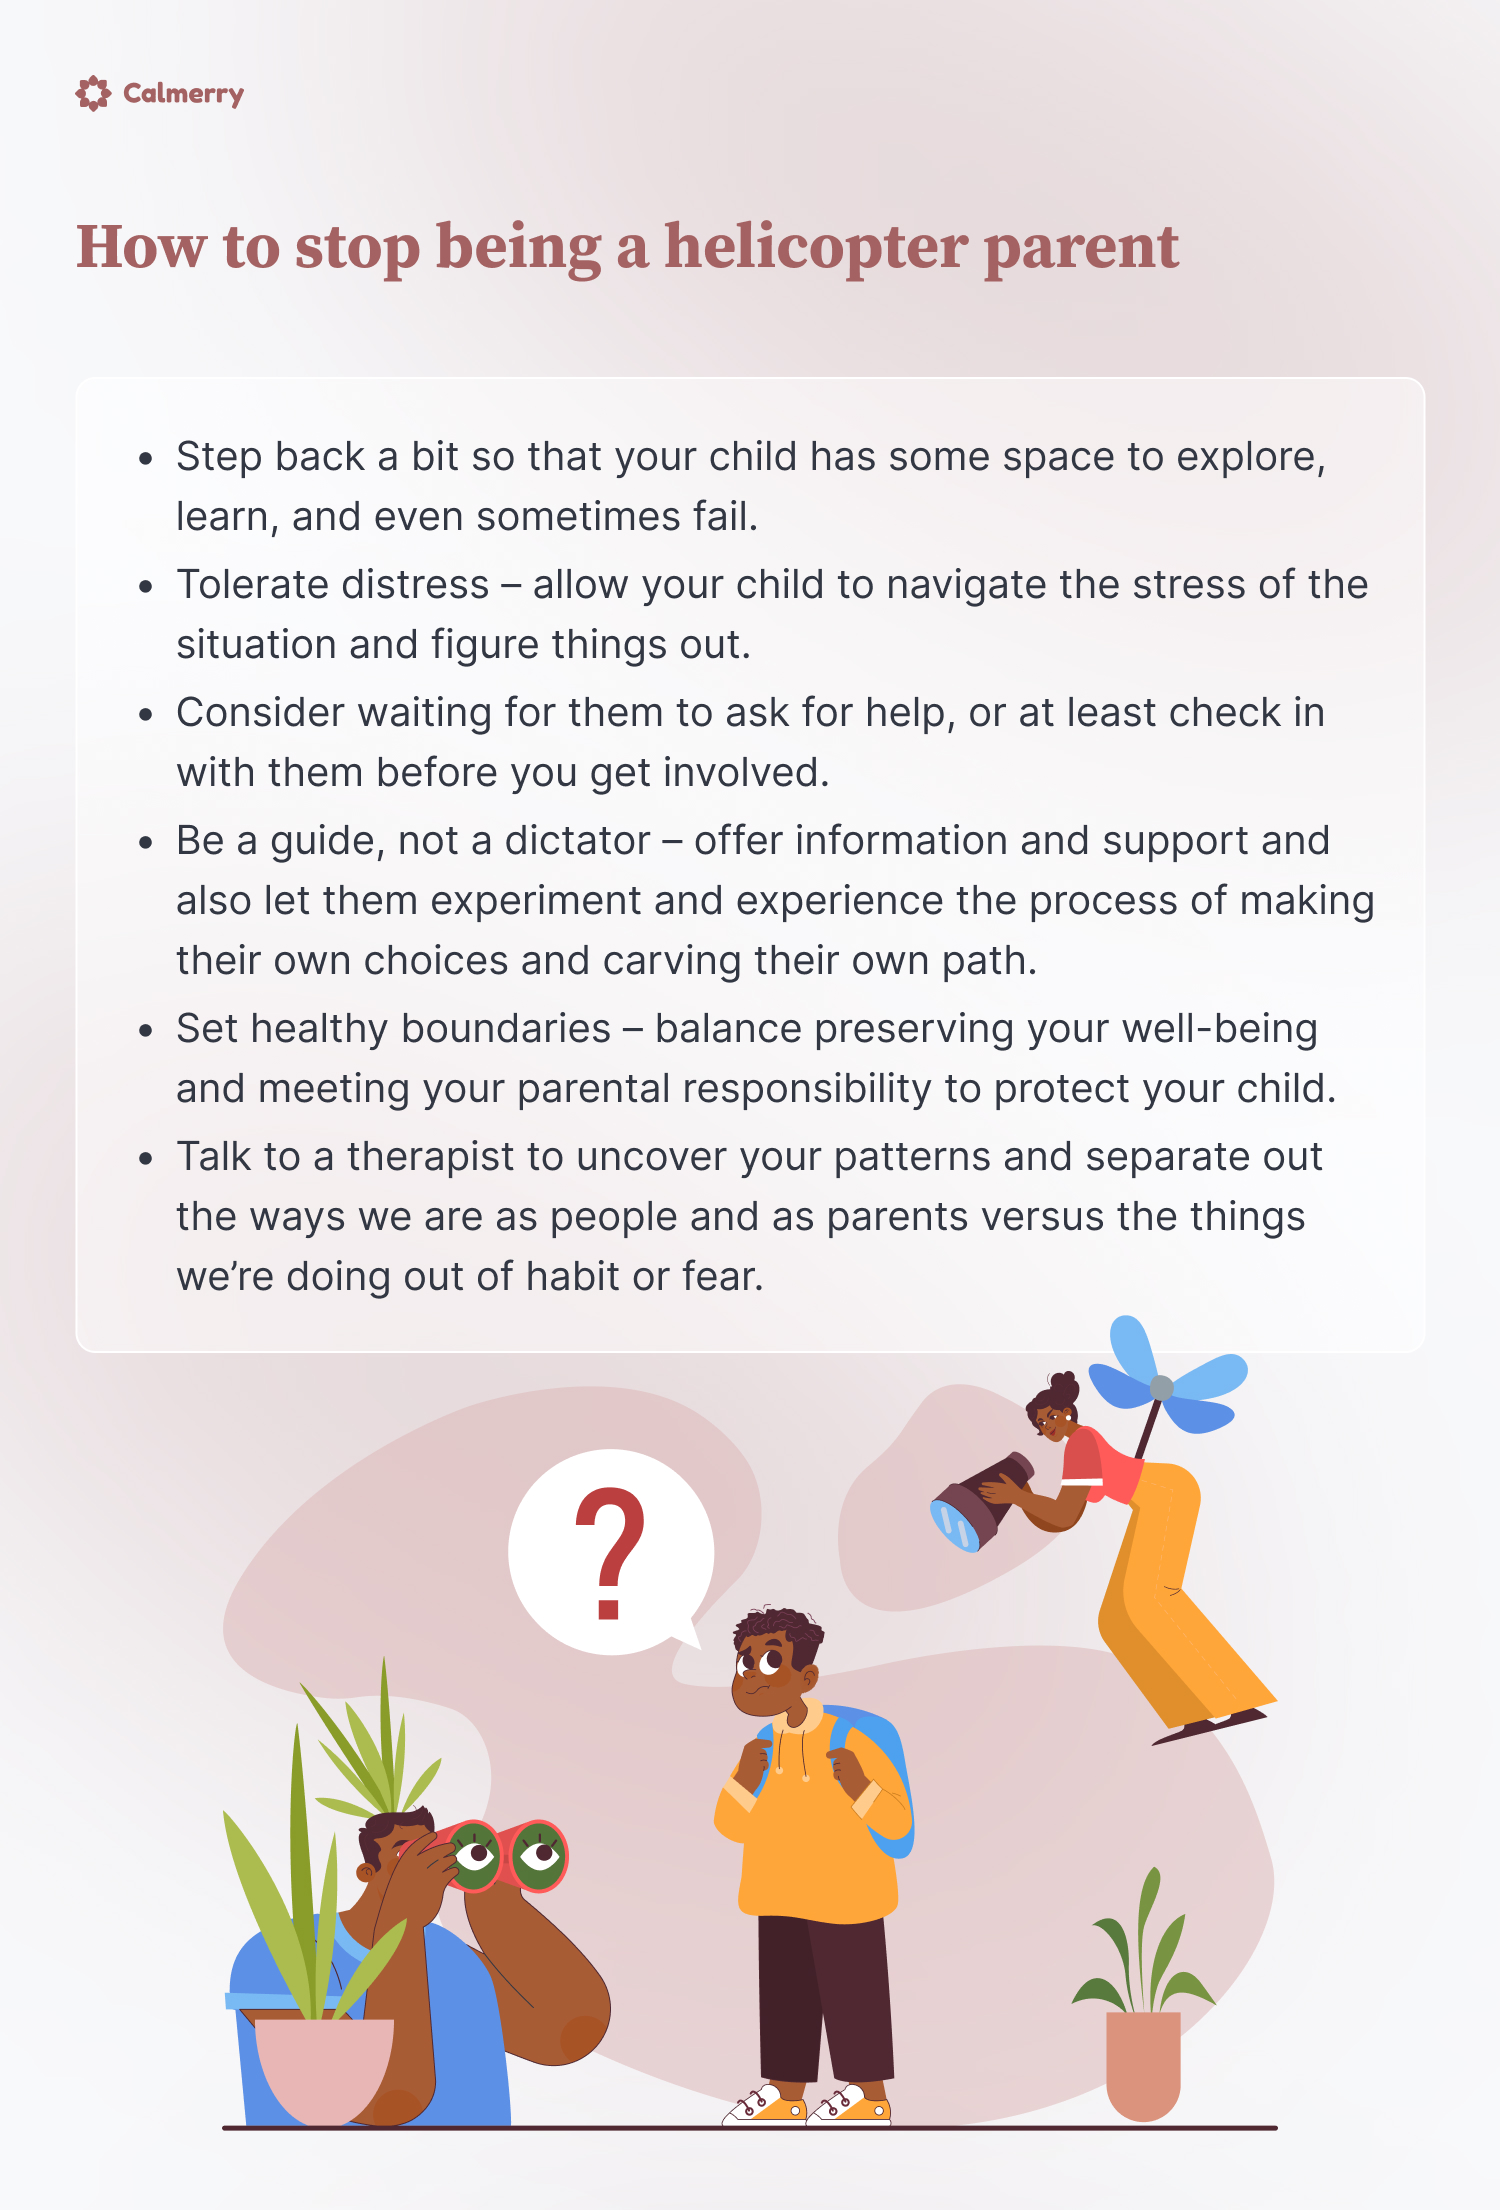 How to stop being a helicopter parent
Step back a bit so that your child has some space to explore, learn, and even sometimes fail. 
Tolerate distress – allow your child to navigate the stress of the situation and figure things out.
Consider waiting for them to ask for help, or at least check in with them before you get involved.
Be a guide, not a dictator – offer information and support and also let them experiment and experience the process of making their own choices and carving their own path. 
Set healthy boundaries – balance preserving your well-being and meeting your parental responsibility to protect your child. 
Talk to a therapist to uncover your patterns and separate out the ways we are as people and as parents versus the things we’re doing out of habit or fear. 